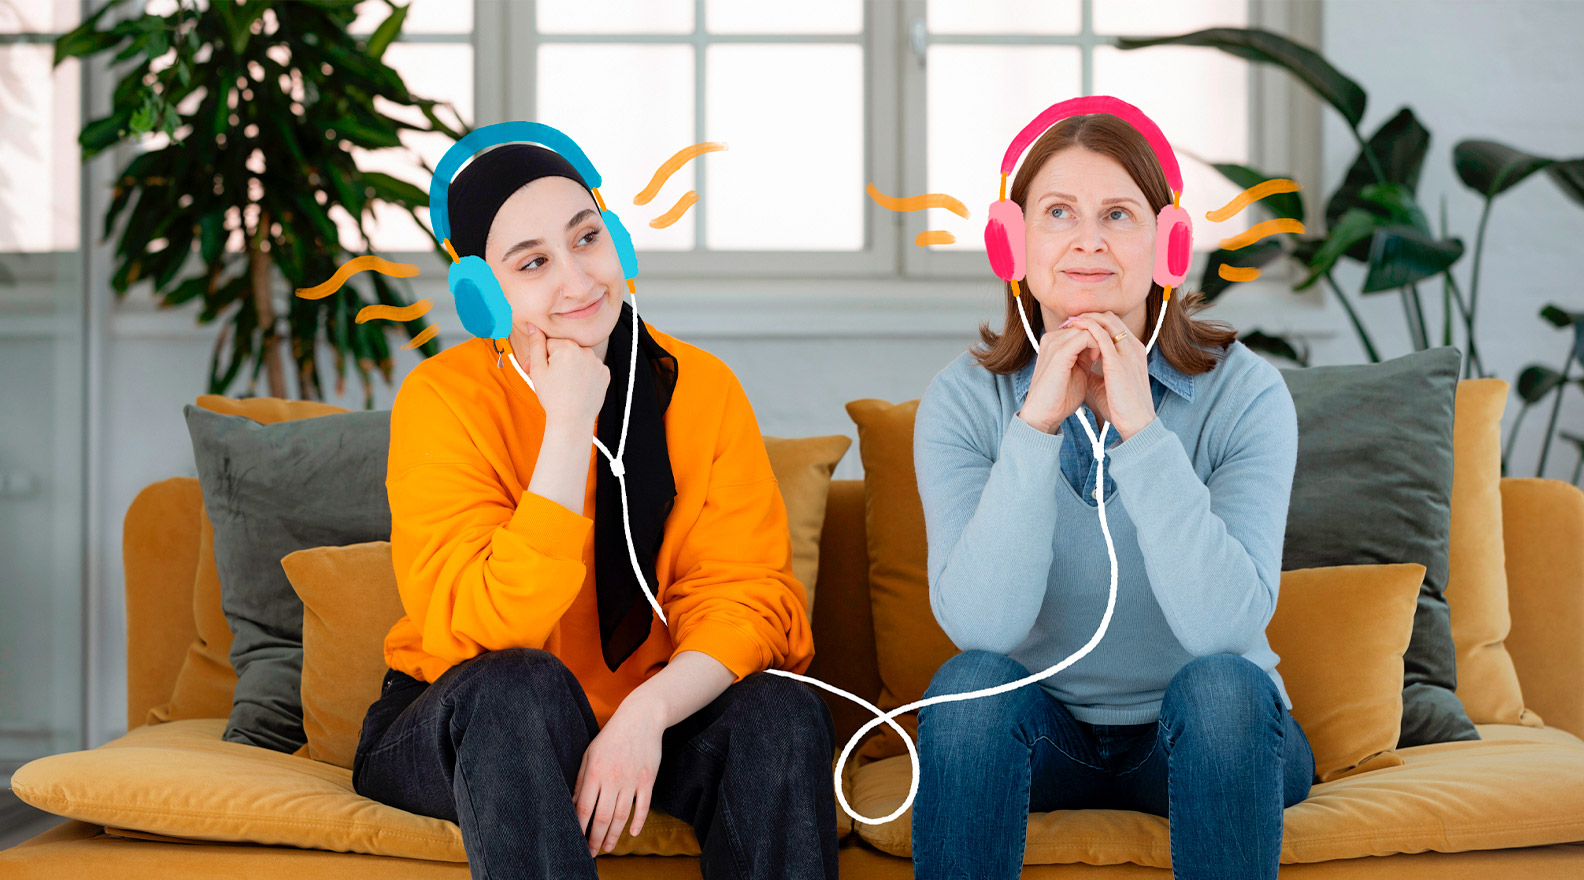 Two women sit next to each other on the couch listening. For both women, headphones have been added in the form of cartoon illustrations.